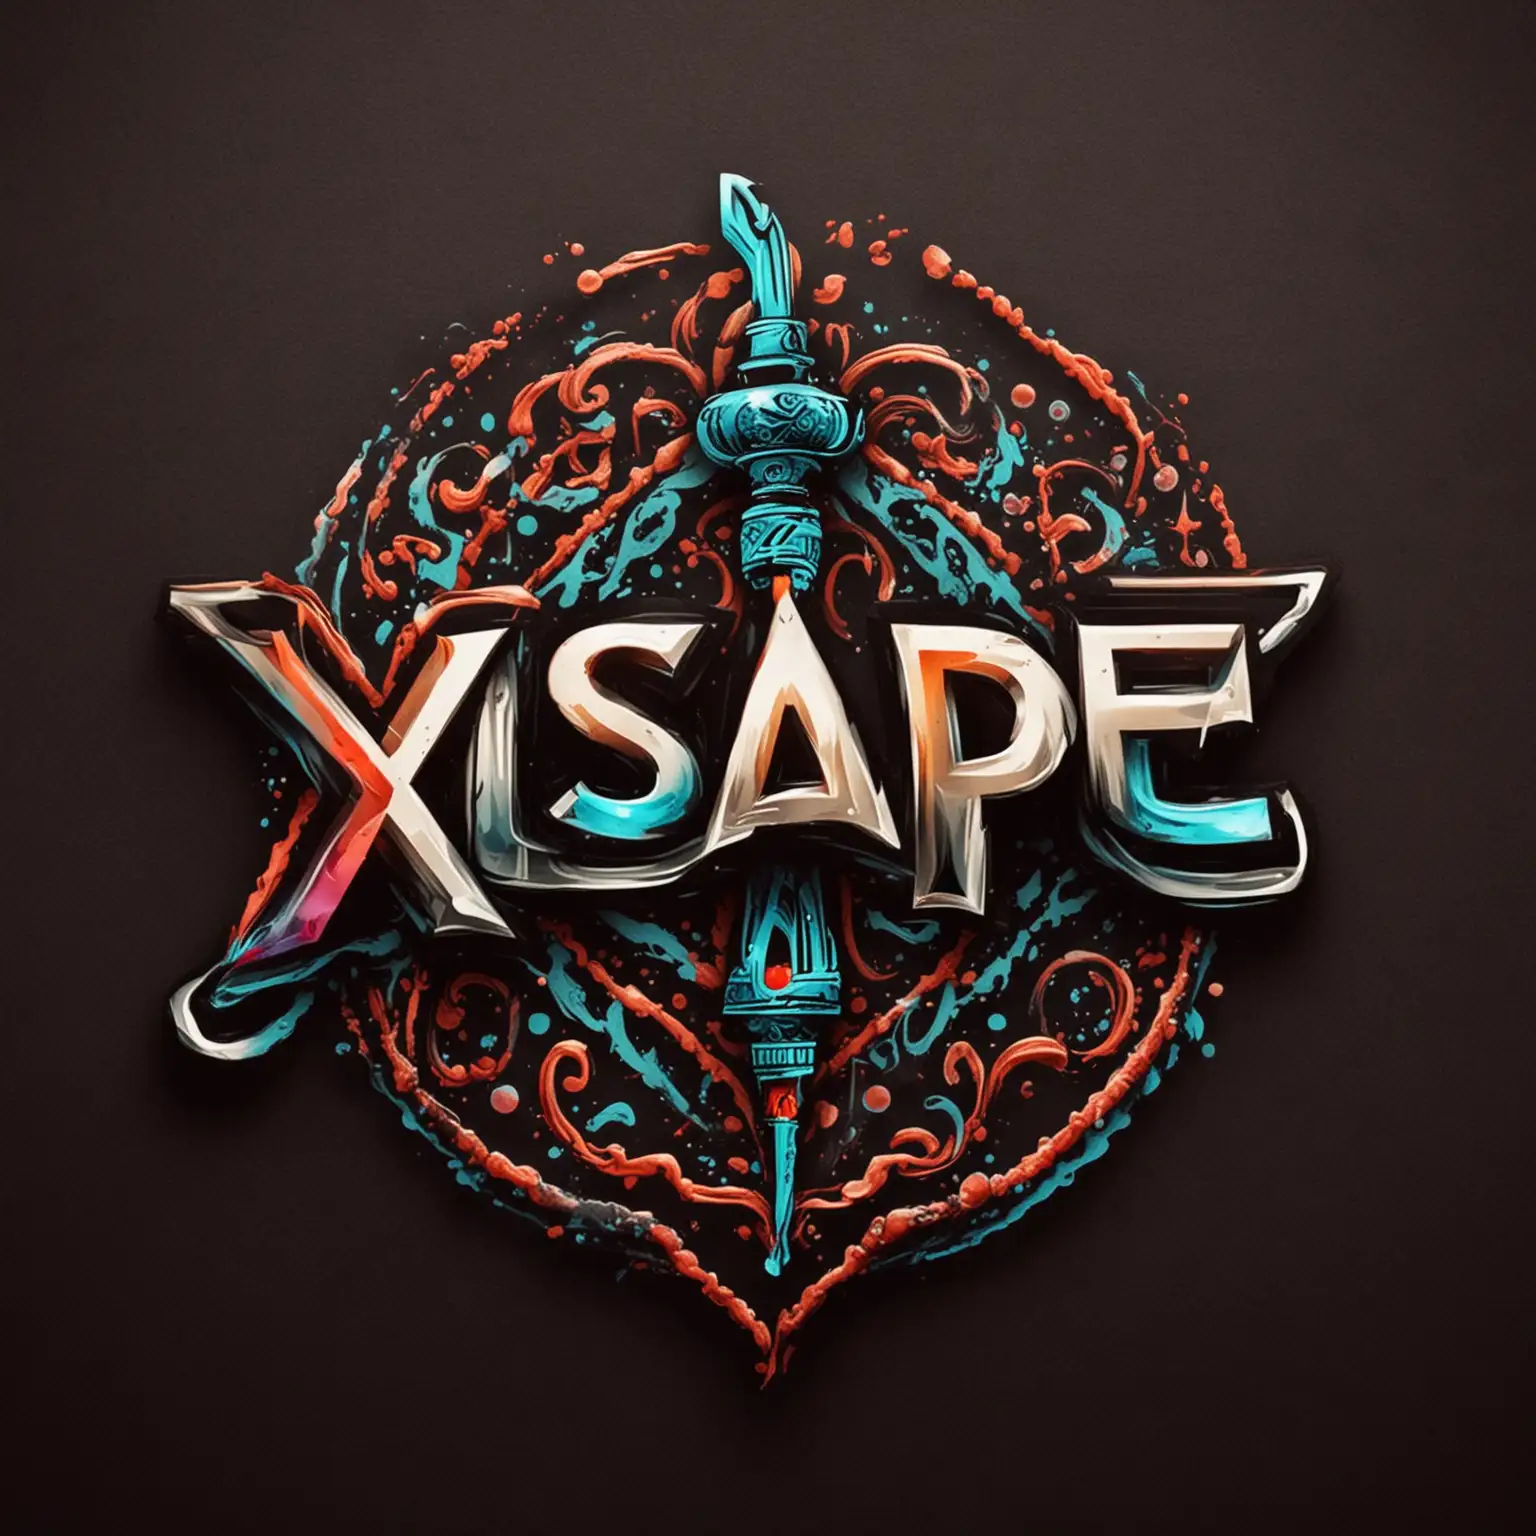 A logo with this word "Xscape" for a hookah bar for front t shart